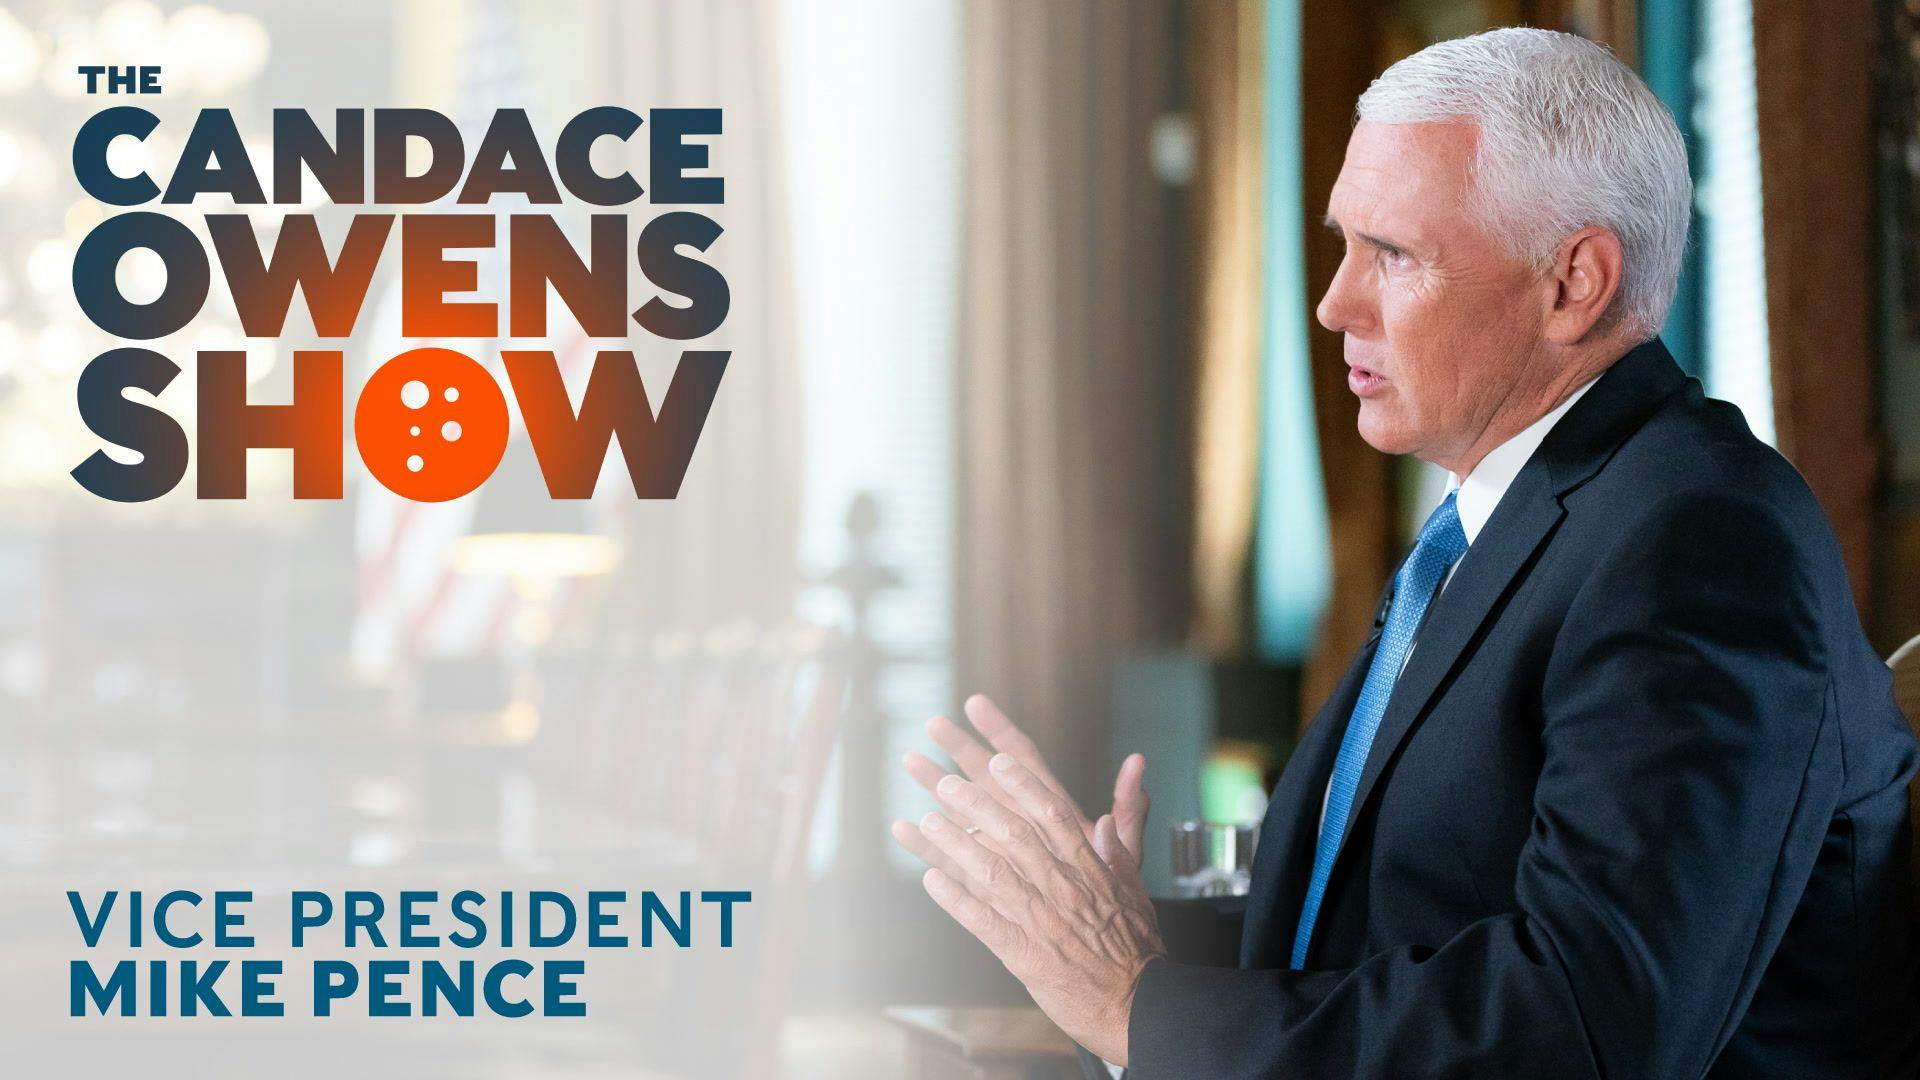 The Candace Owens Show: Vice President Mike Pence